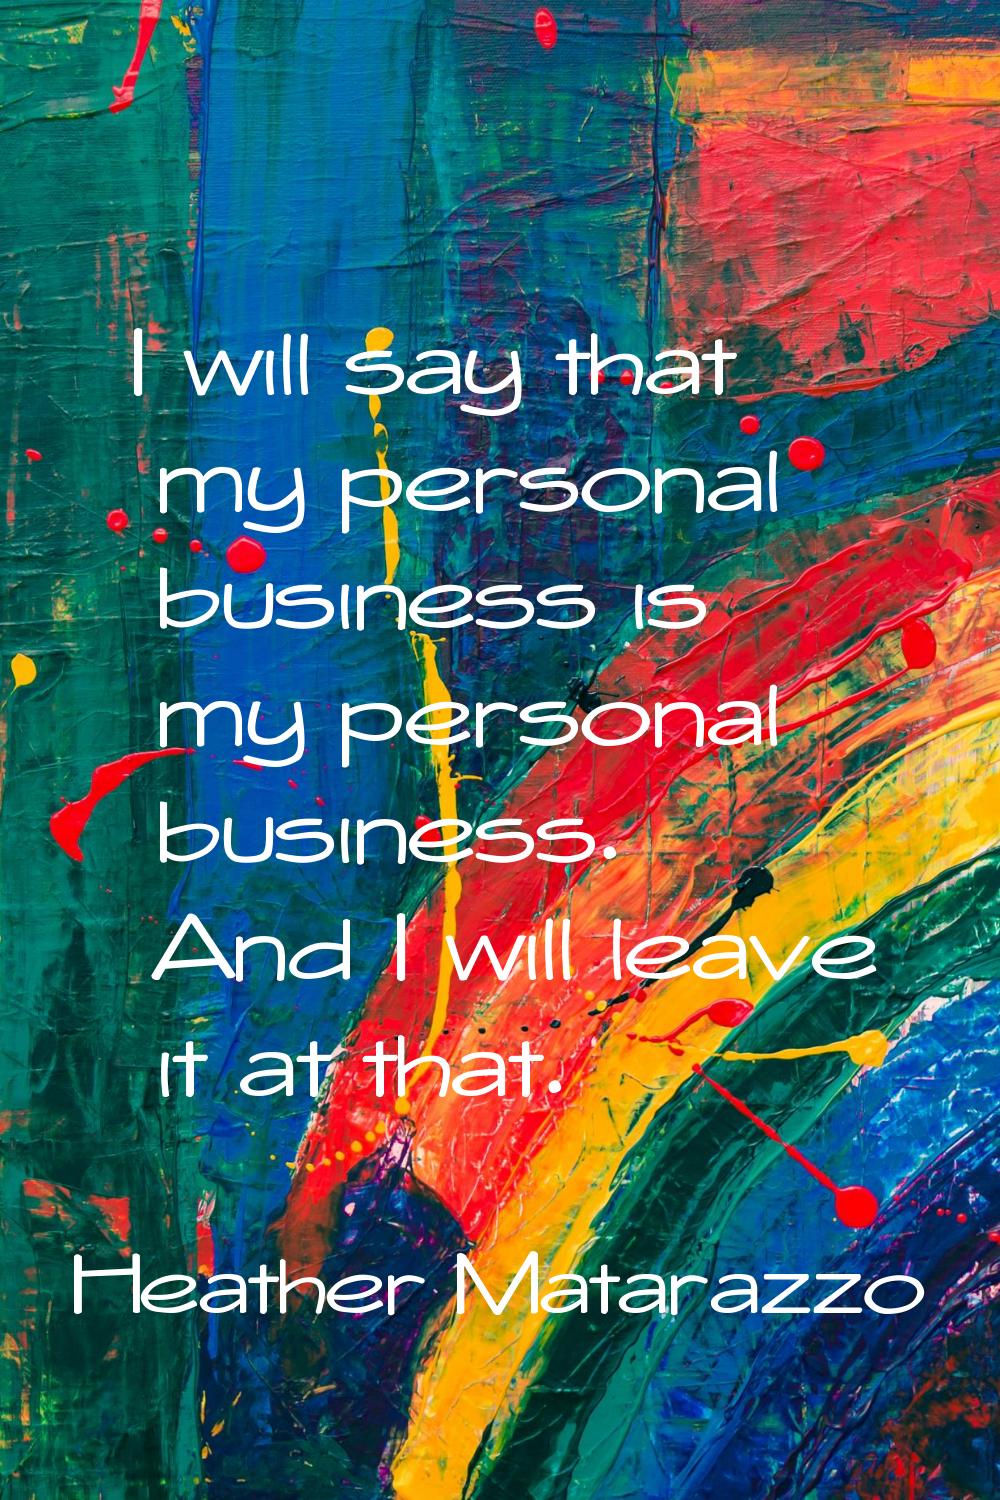 I will say that my personal business is my personal business. And I will leave it at that.